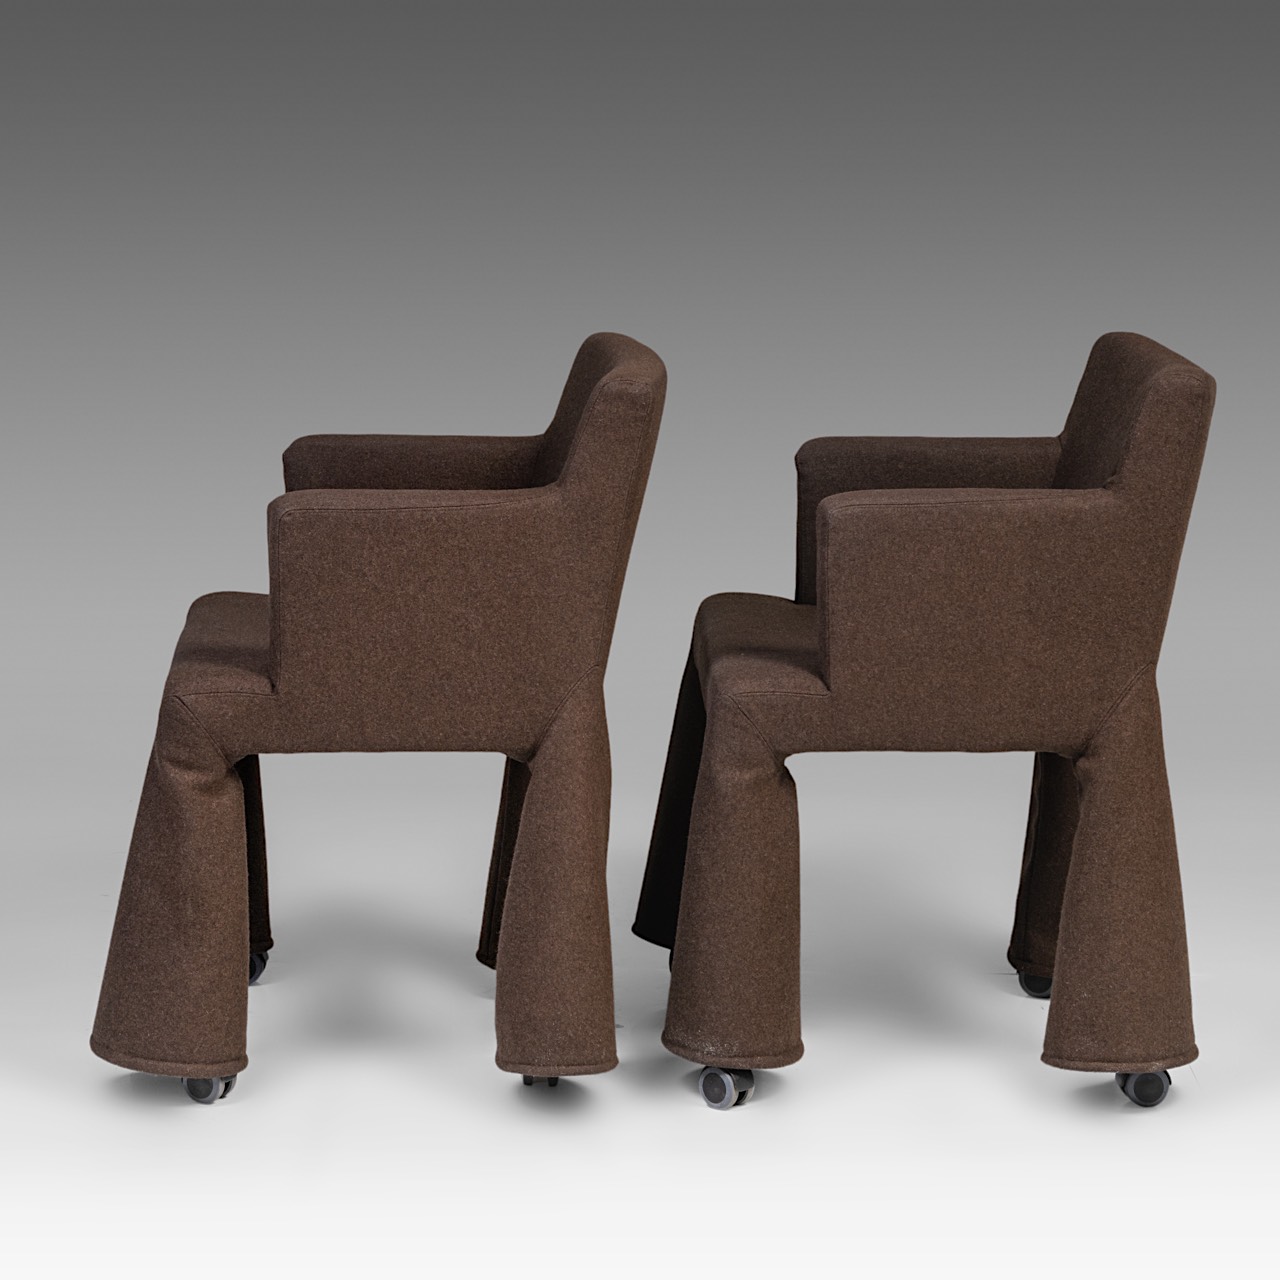 A pair of 'VIP' chairs by Marcel Wanders, the Netherlands, 2000, H 82 - W 60 cm - Image 4 of 9